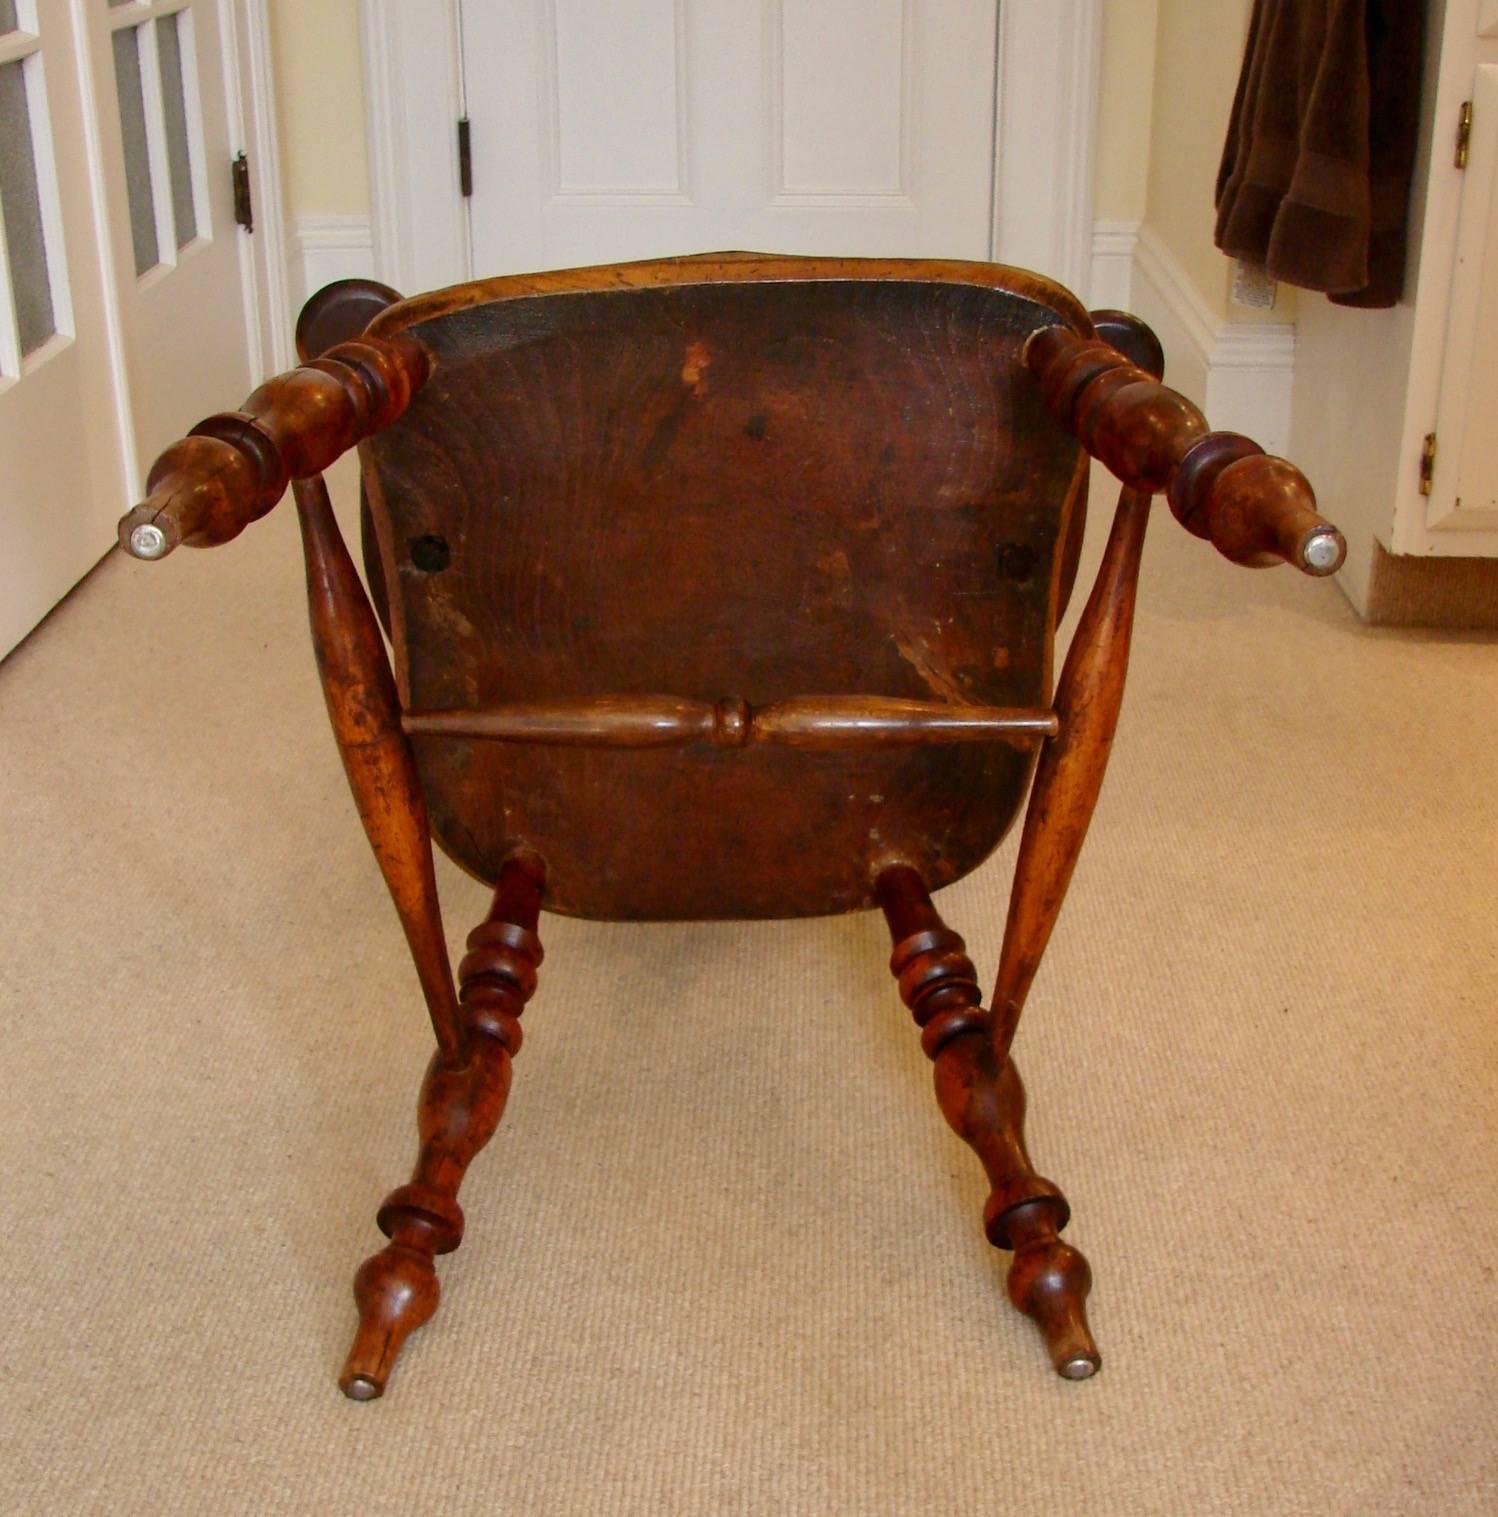 Yew Wood Broad Arm High Back Windsor Chair 1